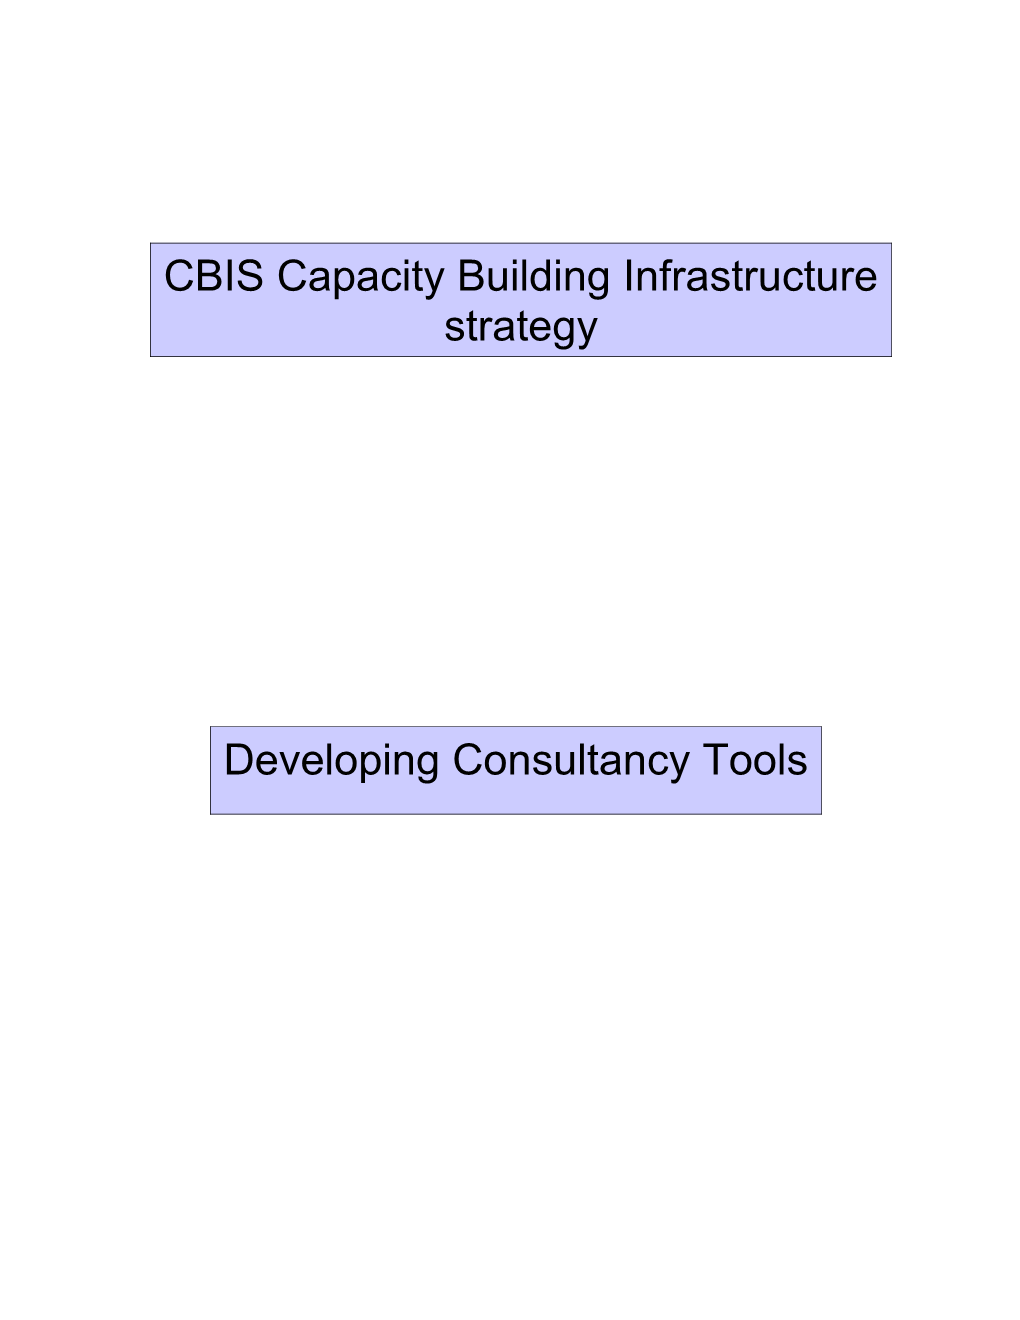 CBIS Capacity Building Infrastructure Strategy